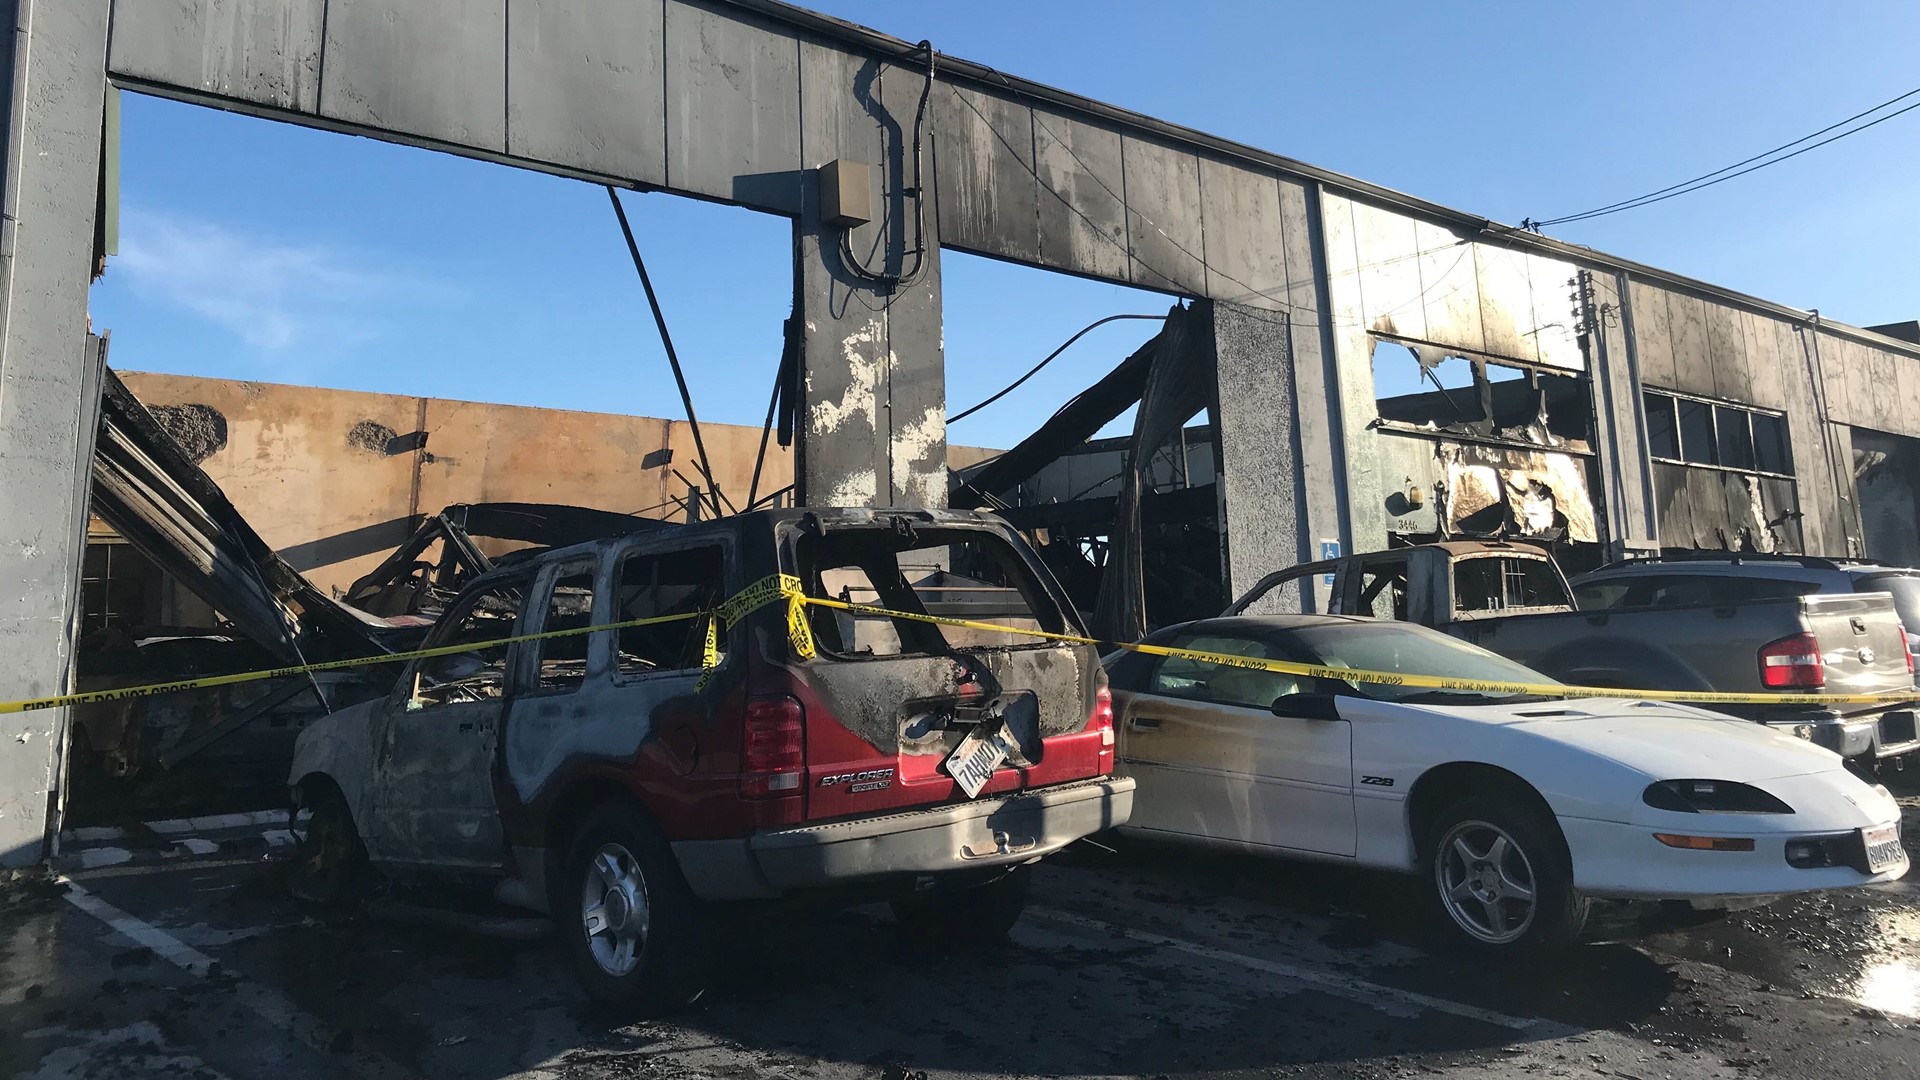 A massive five-alarm fire in South Sacramento wiped out multiple family-owned businesses on Monday night, requiring resources from across the region.